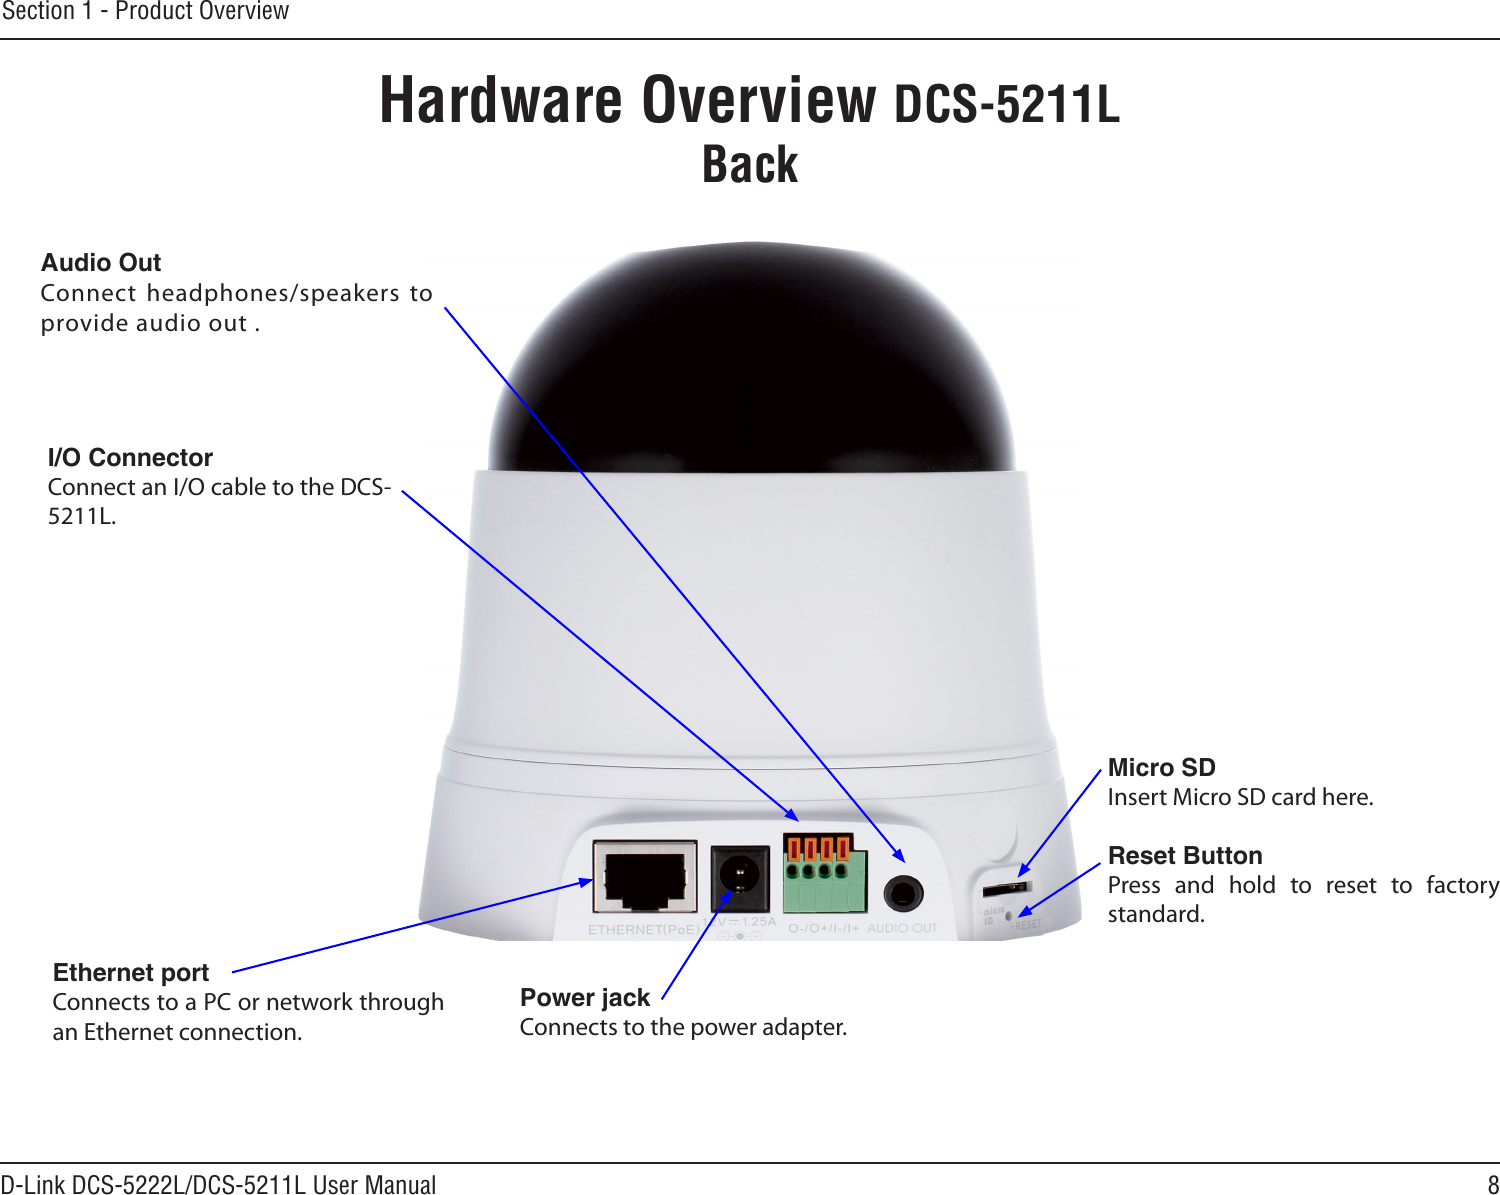 8D-Link DCS-5222L/DCS-5211L User ManualSection 1 - Product OverviewHardware Overview DCS-5211LBackPower jackConnects to the power adapter.Ethernet portConnects to a PC or network through an Ethernet connection.I/O ConnectorConnect an I/O cable to the DCS-5211L.Audio OutConnect headphones/speakers to provide audio out .Micro SDInsert Micro SD card here.Reset ButtonPress  and  hold  to  reset  to  factory standard. 